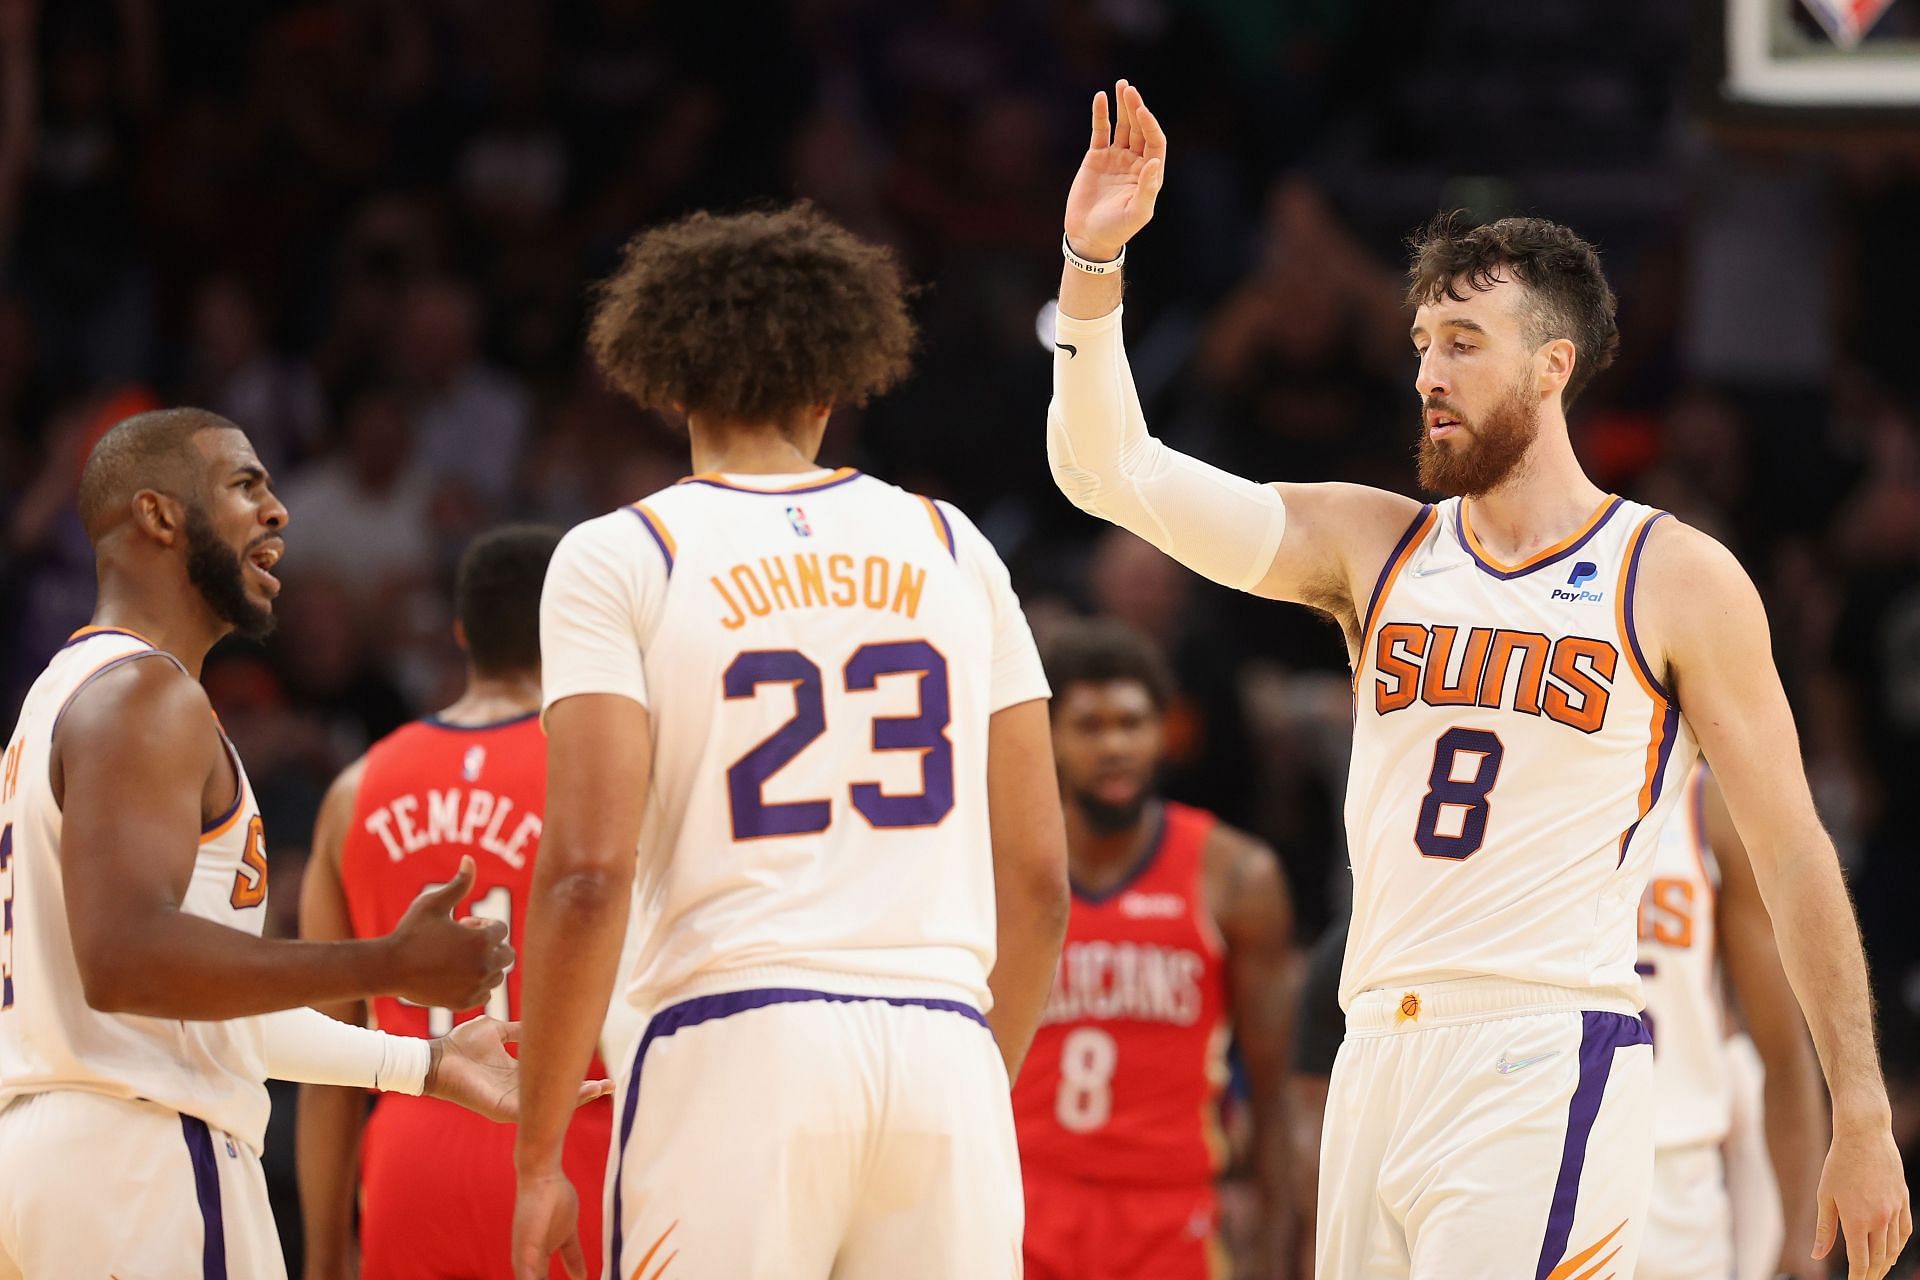 Phoenix Suns celebrate a play against the New Orleans Pelicans.